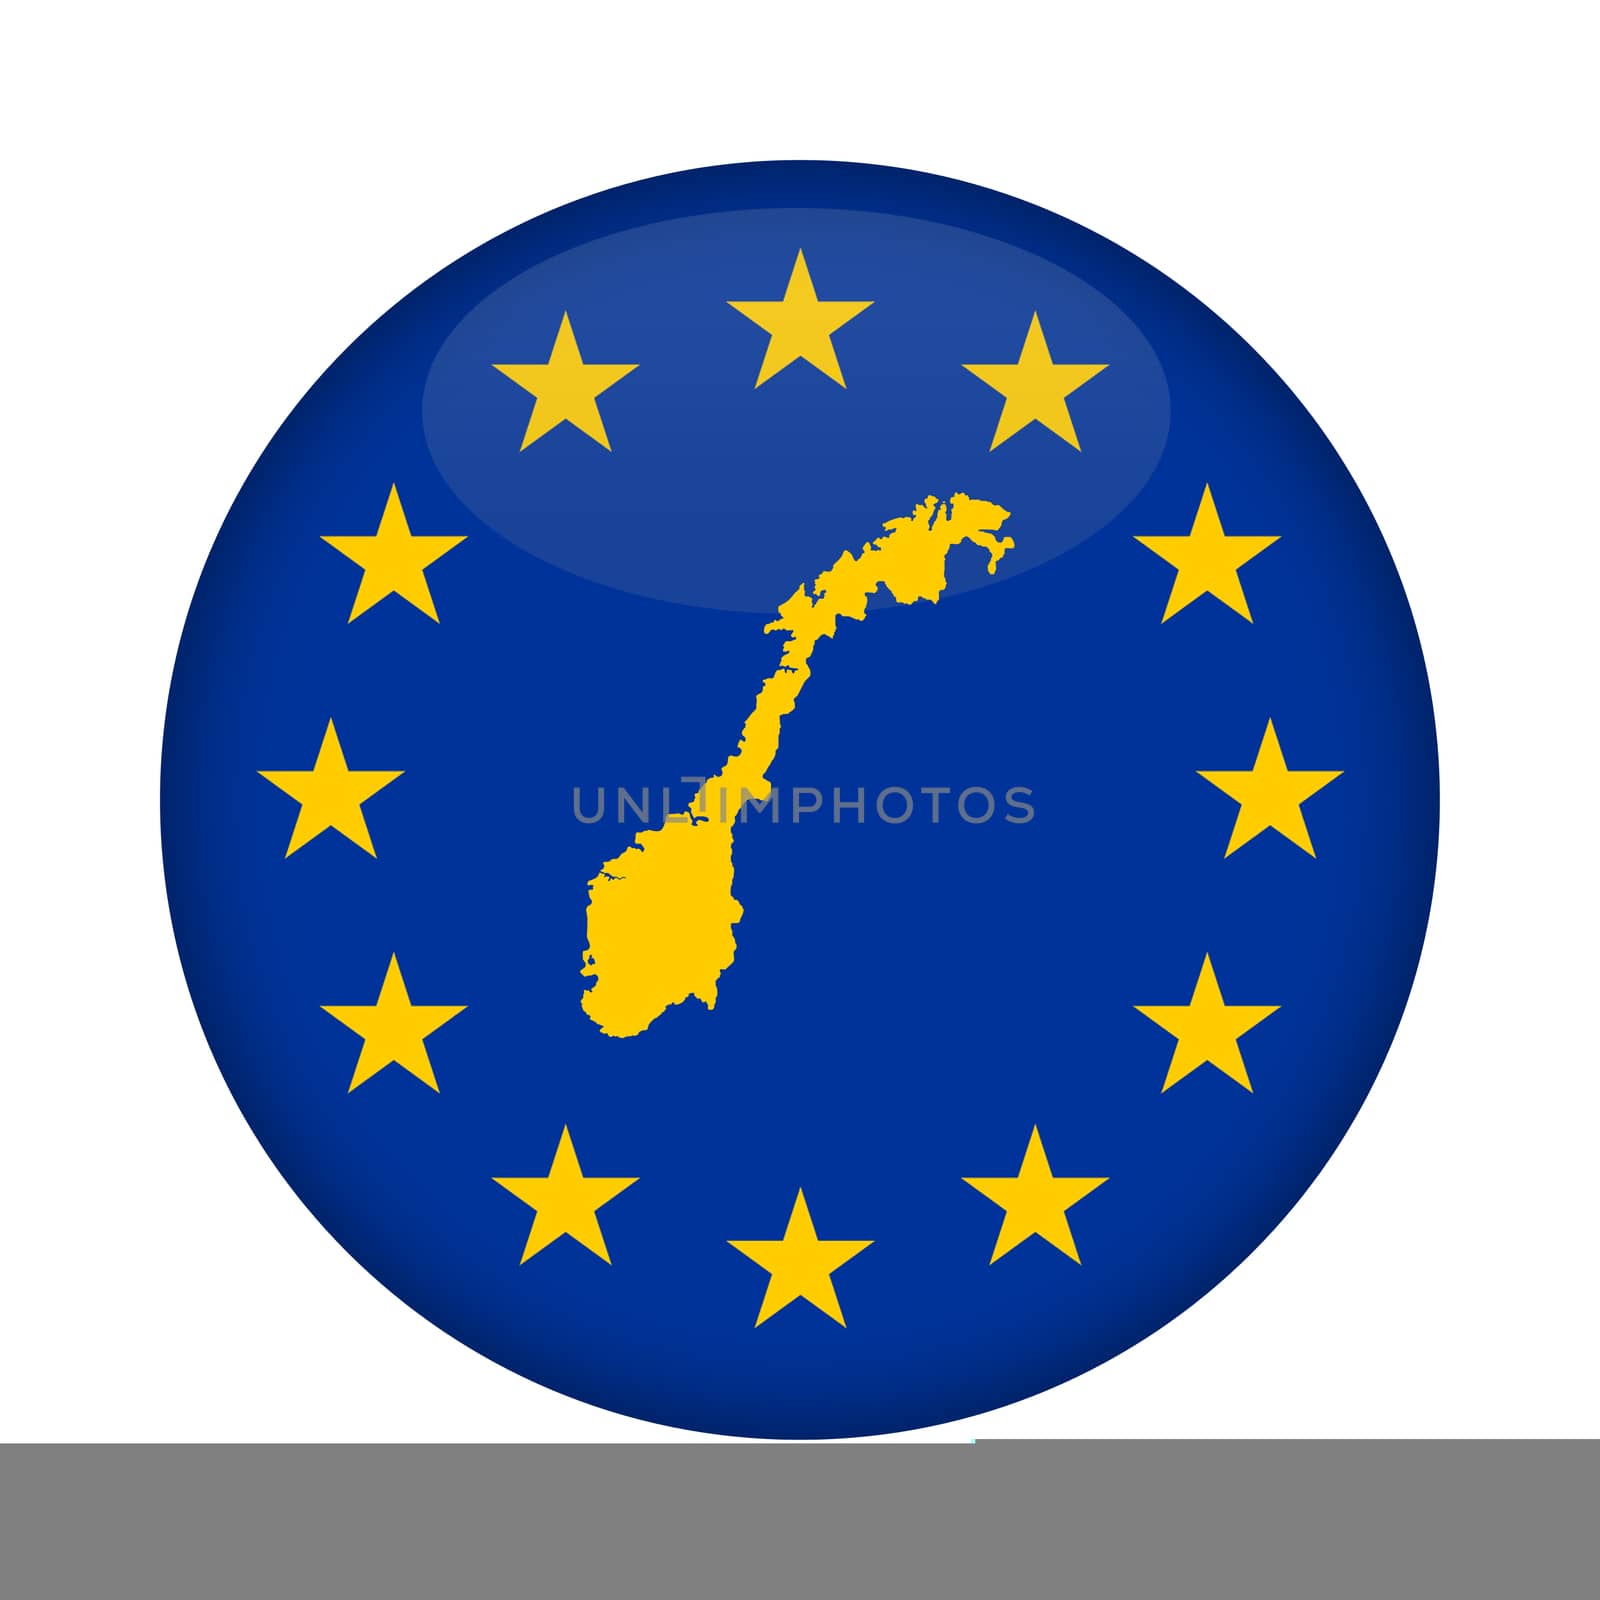 Norway map on a European Union flag button isolated on a white background.